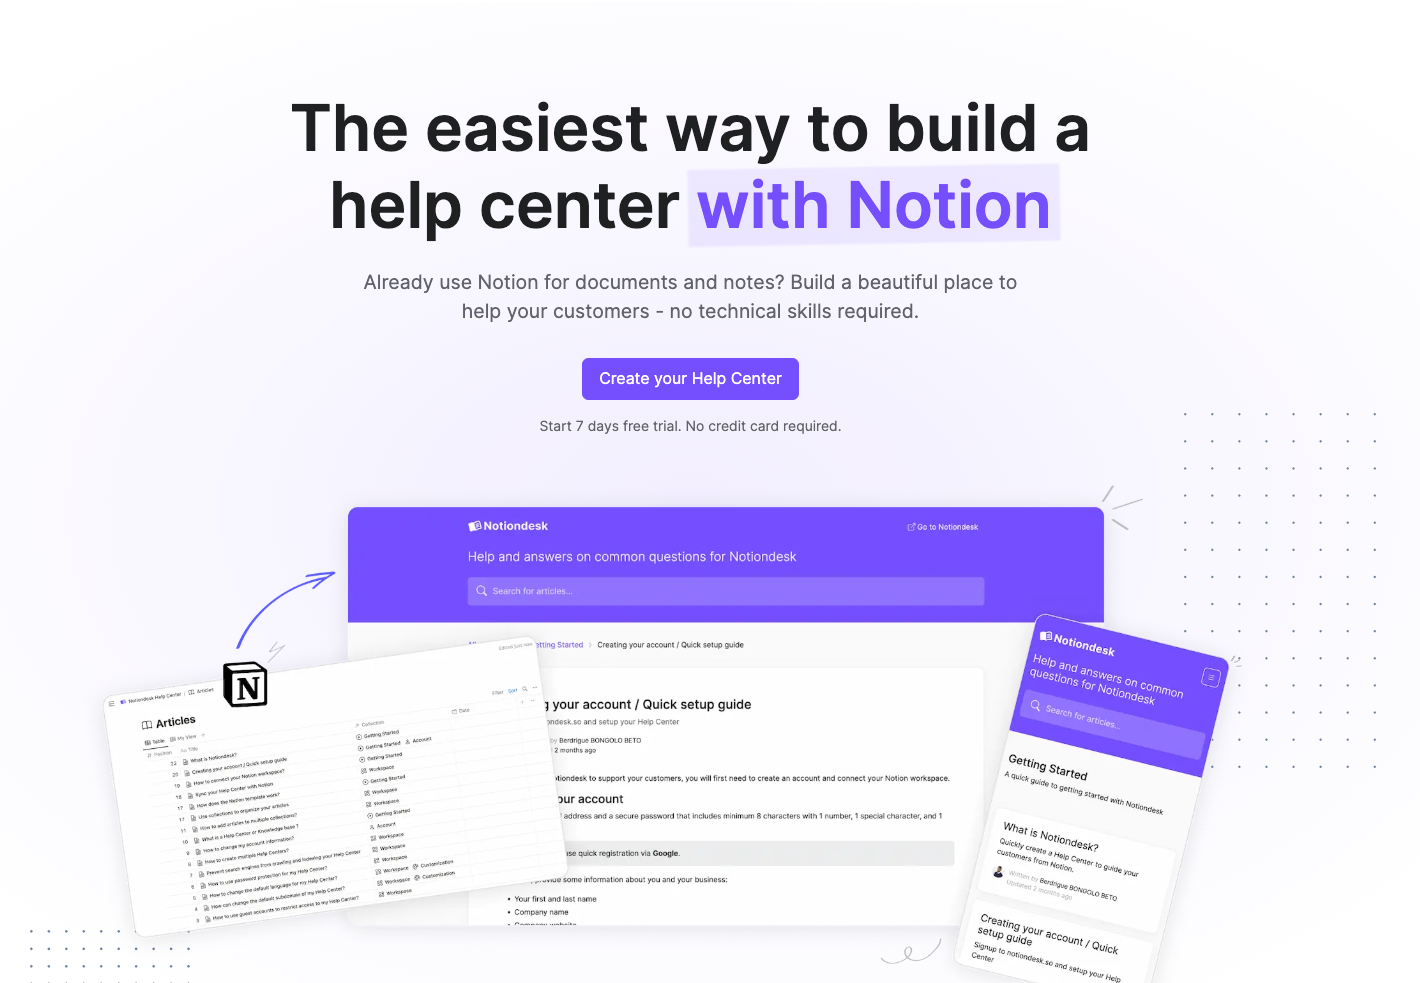 The easiest way to build a help center with Notion